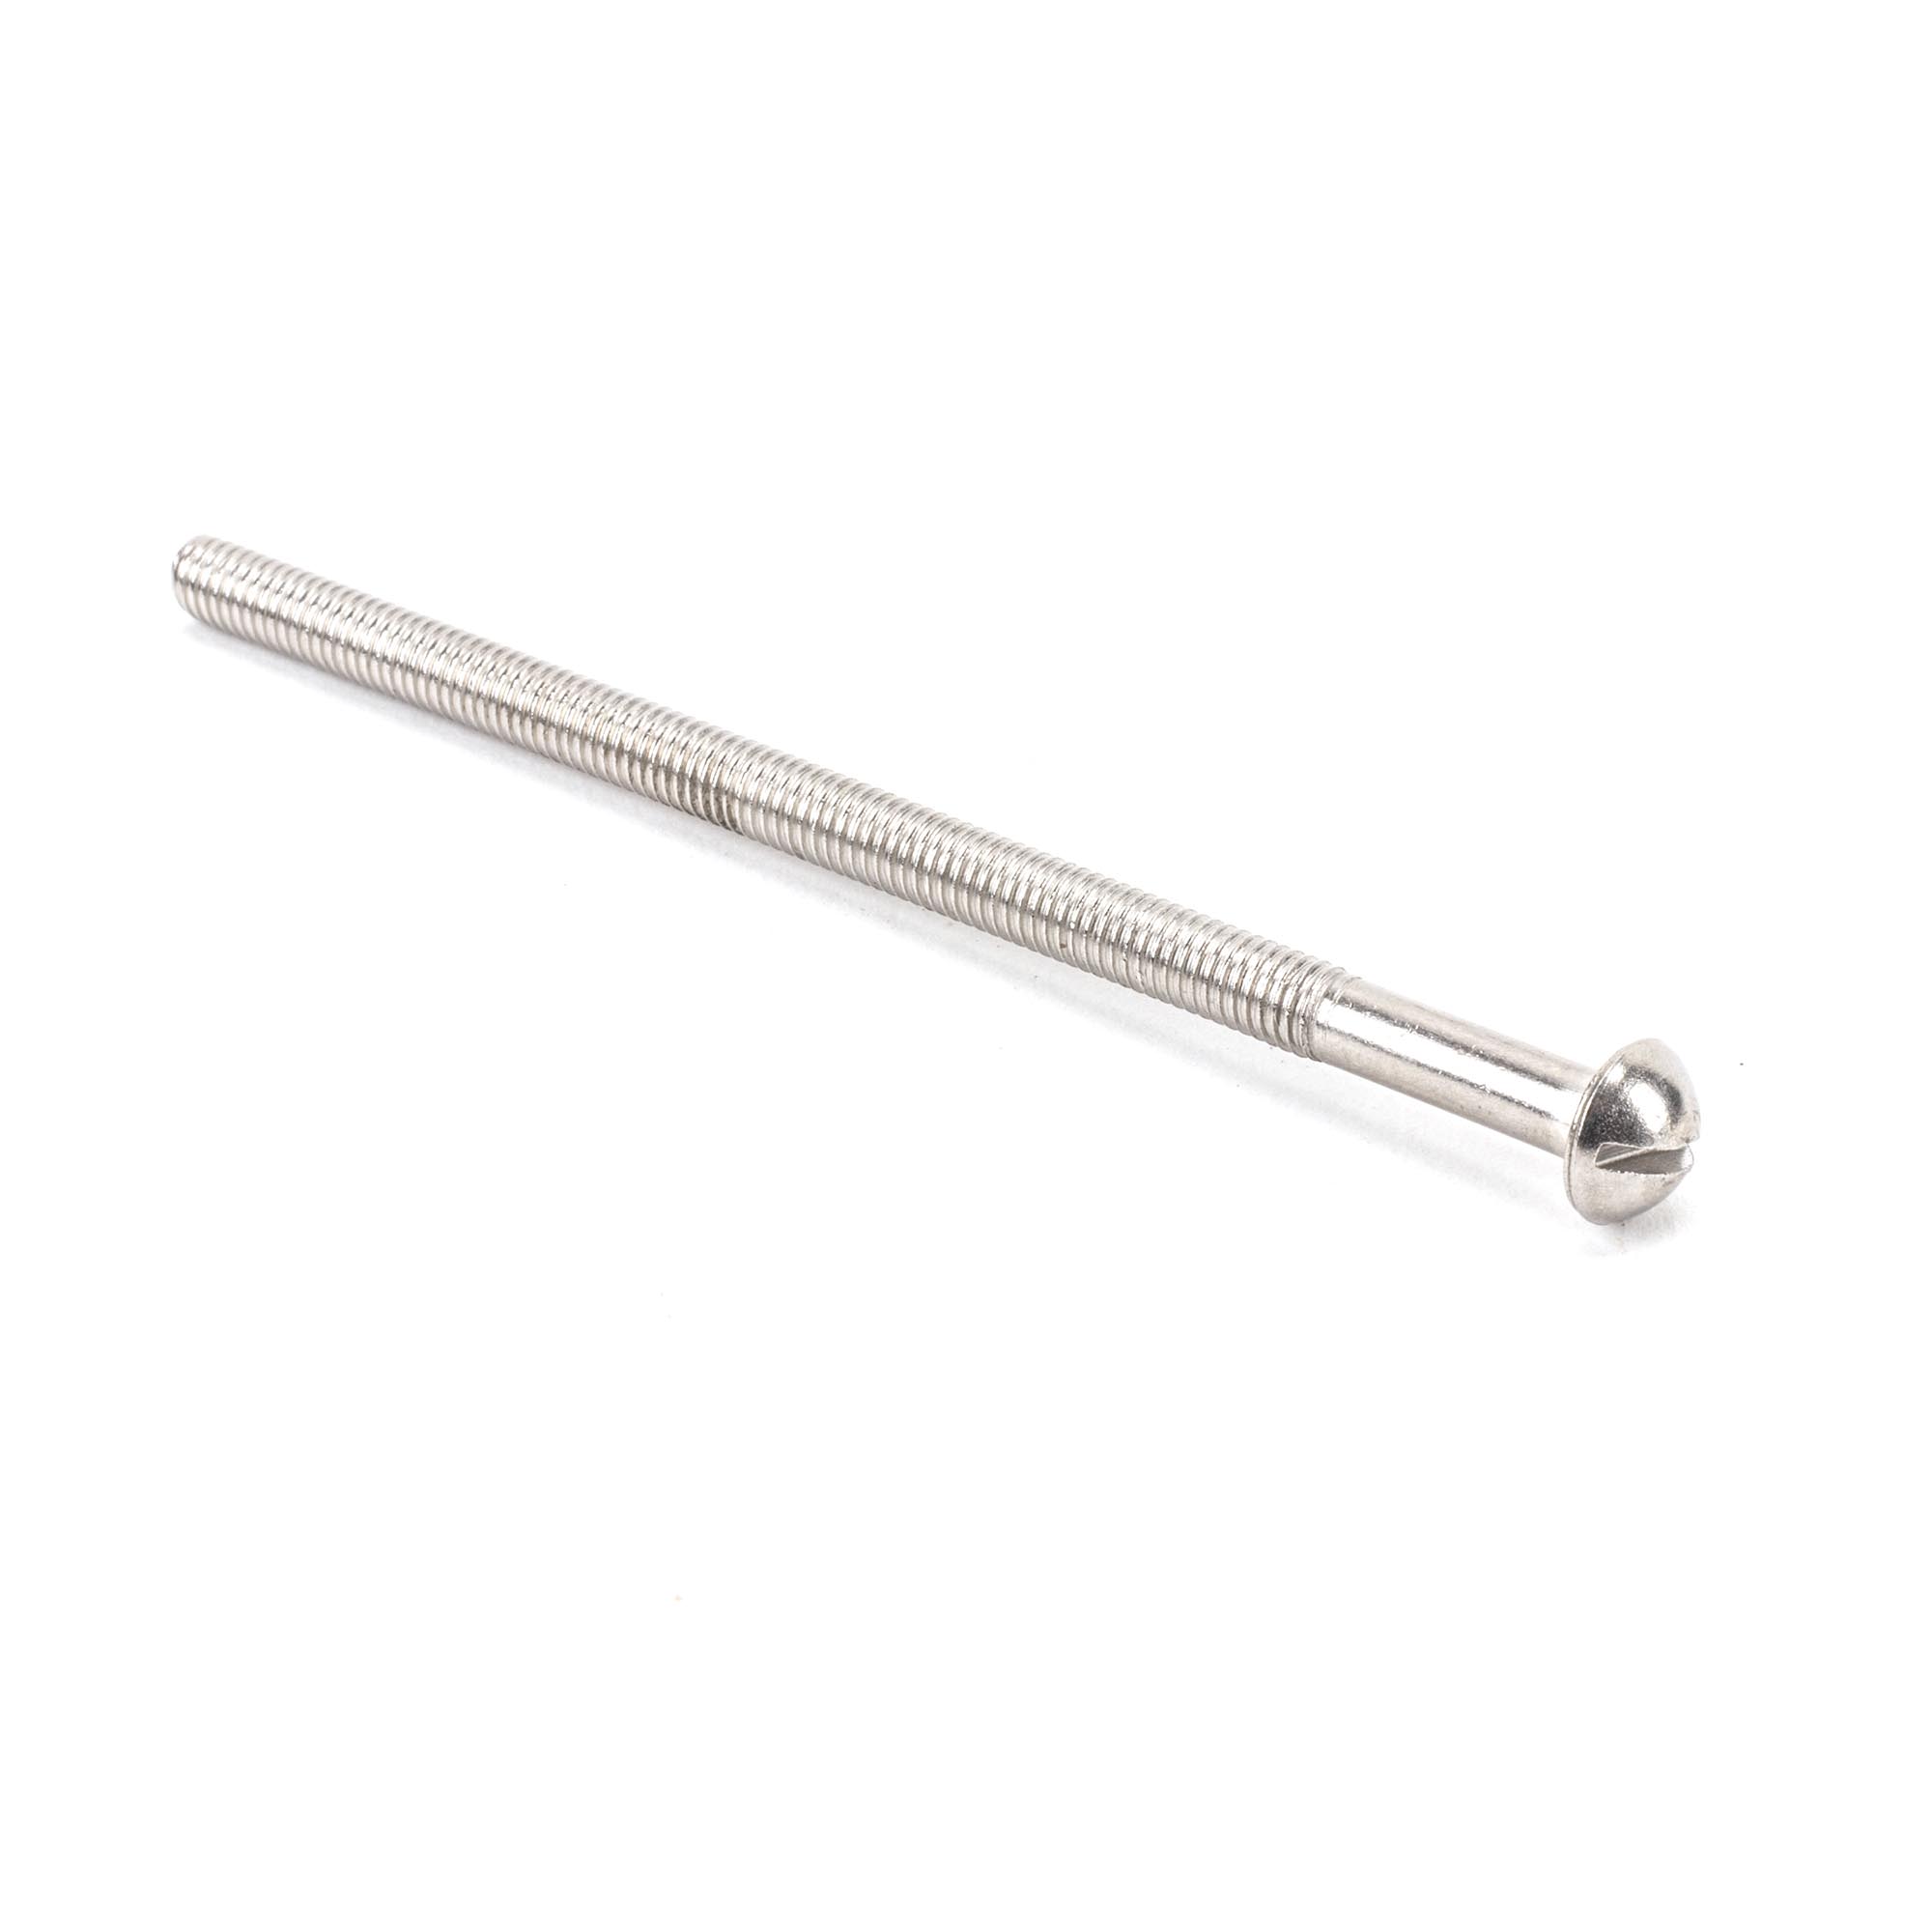 FTA 91253 STAINLESS STEEL M5 X 90MM MALE BOLT (1)